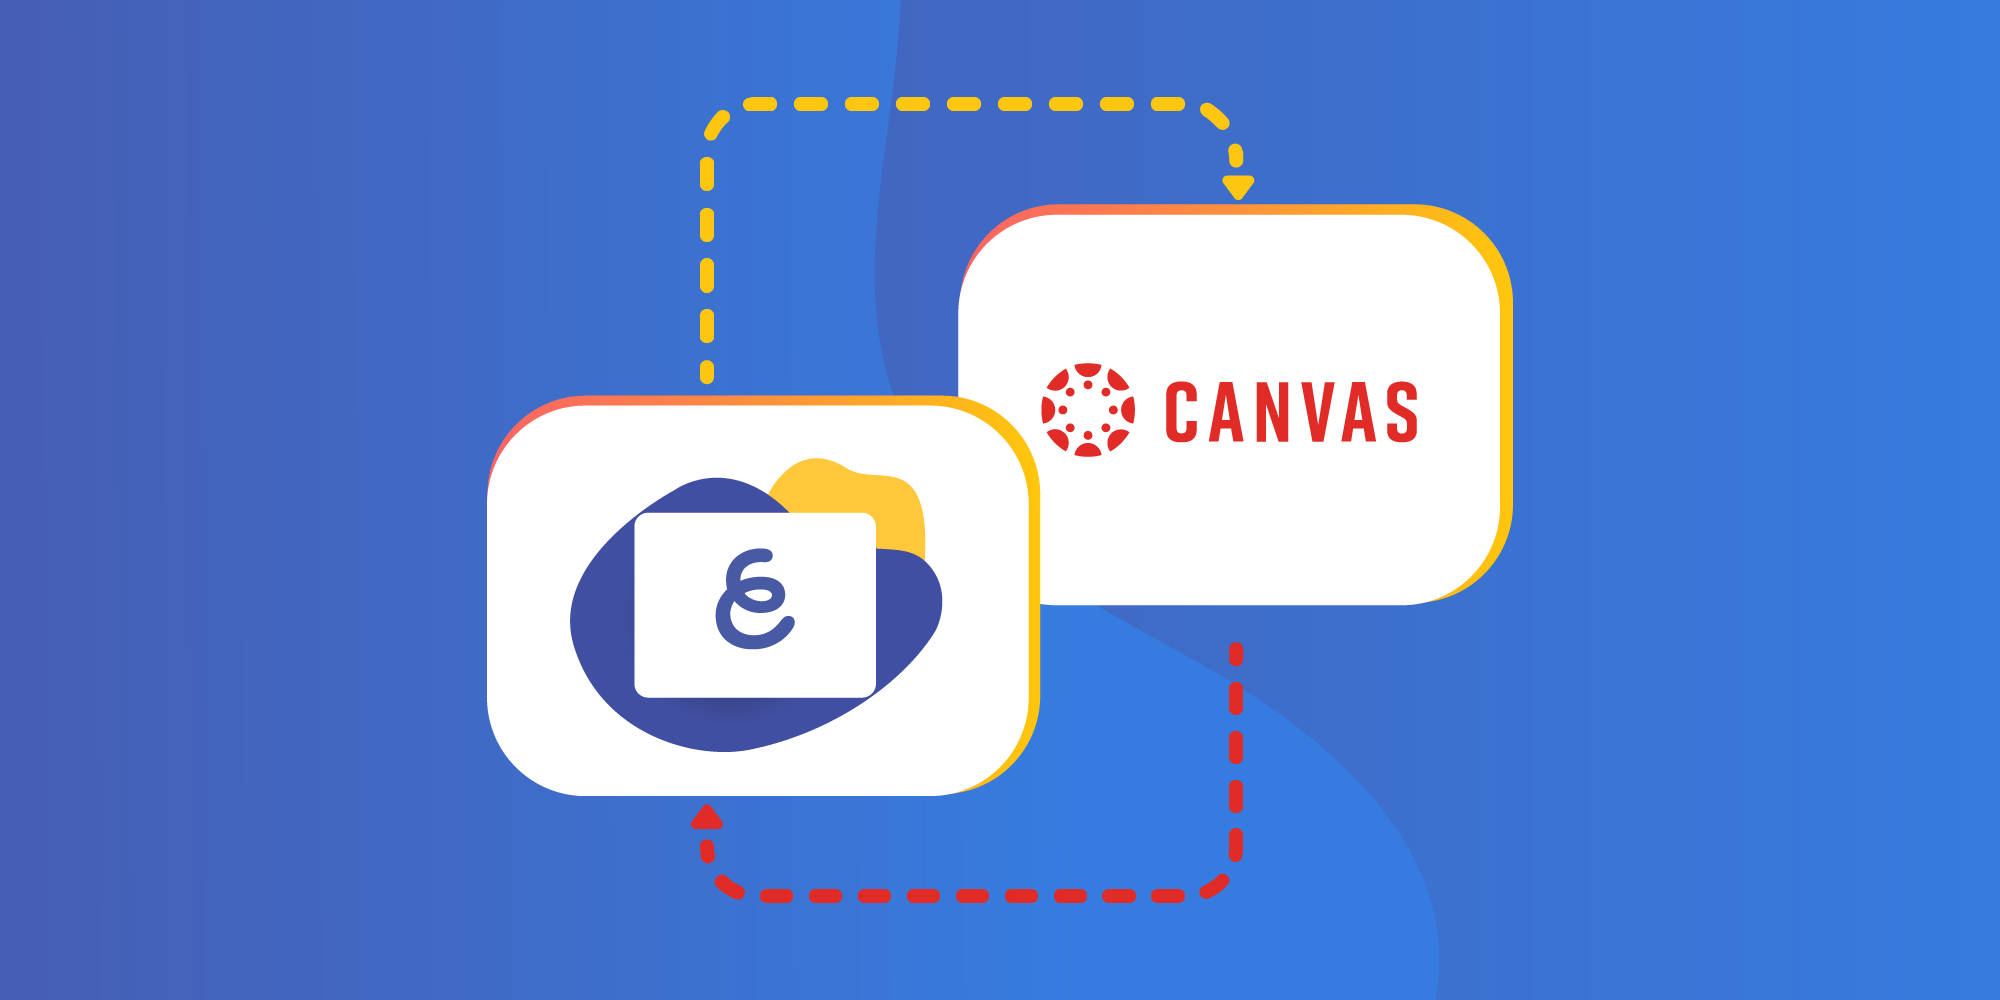 Canvas in Explain Everything whiteboard